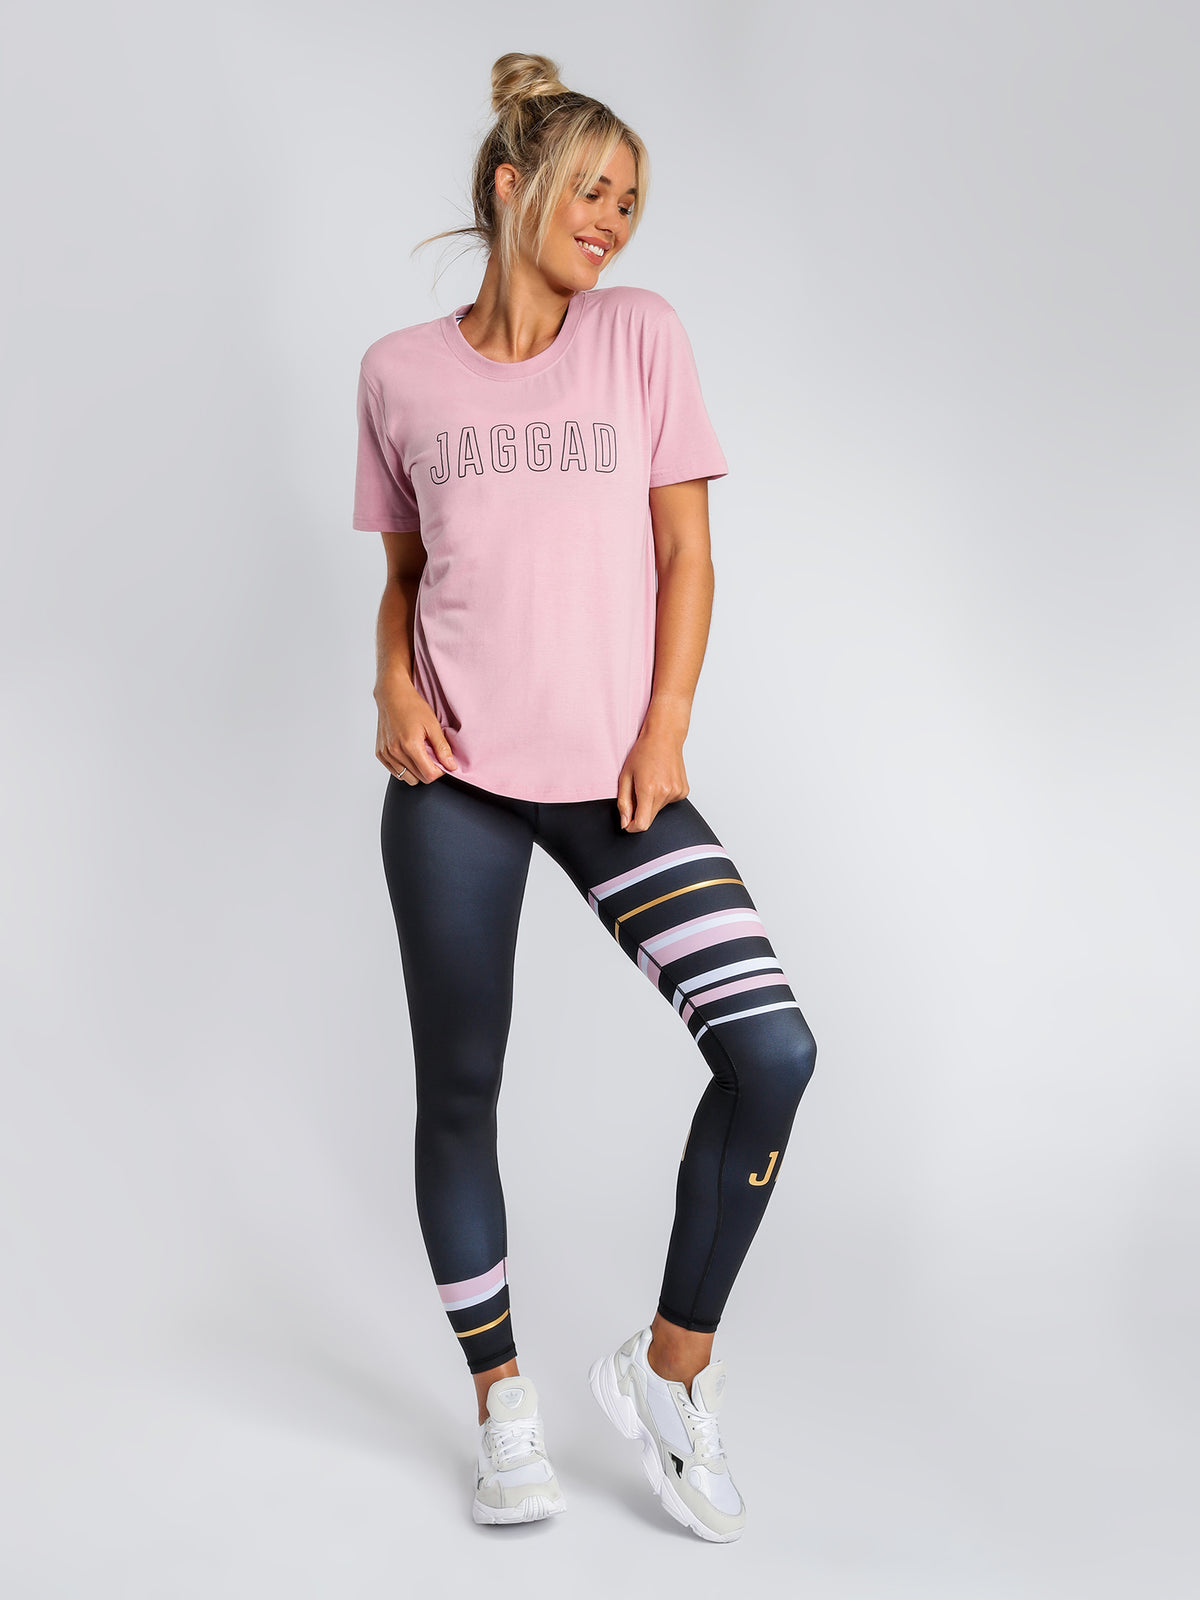 Stadium Classic Short Sleeve T-Shirt in Coral Blush Pink